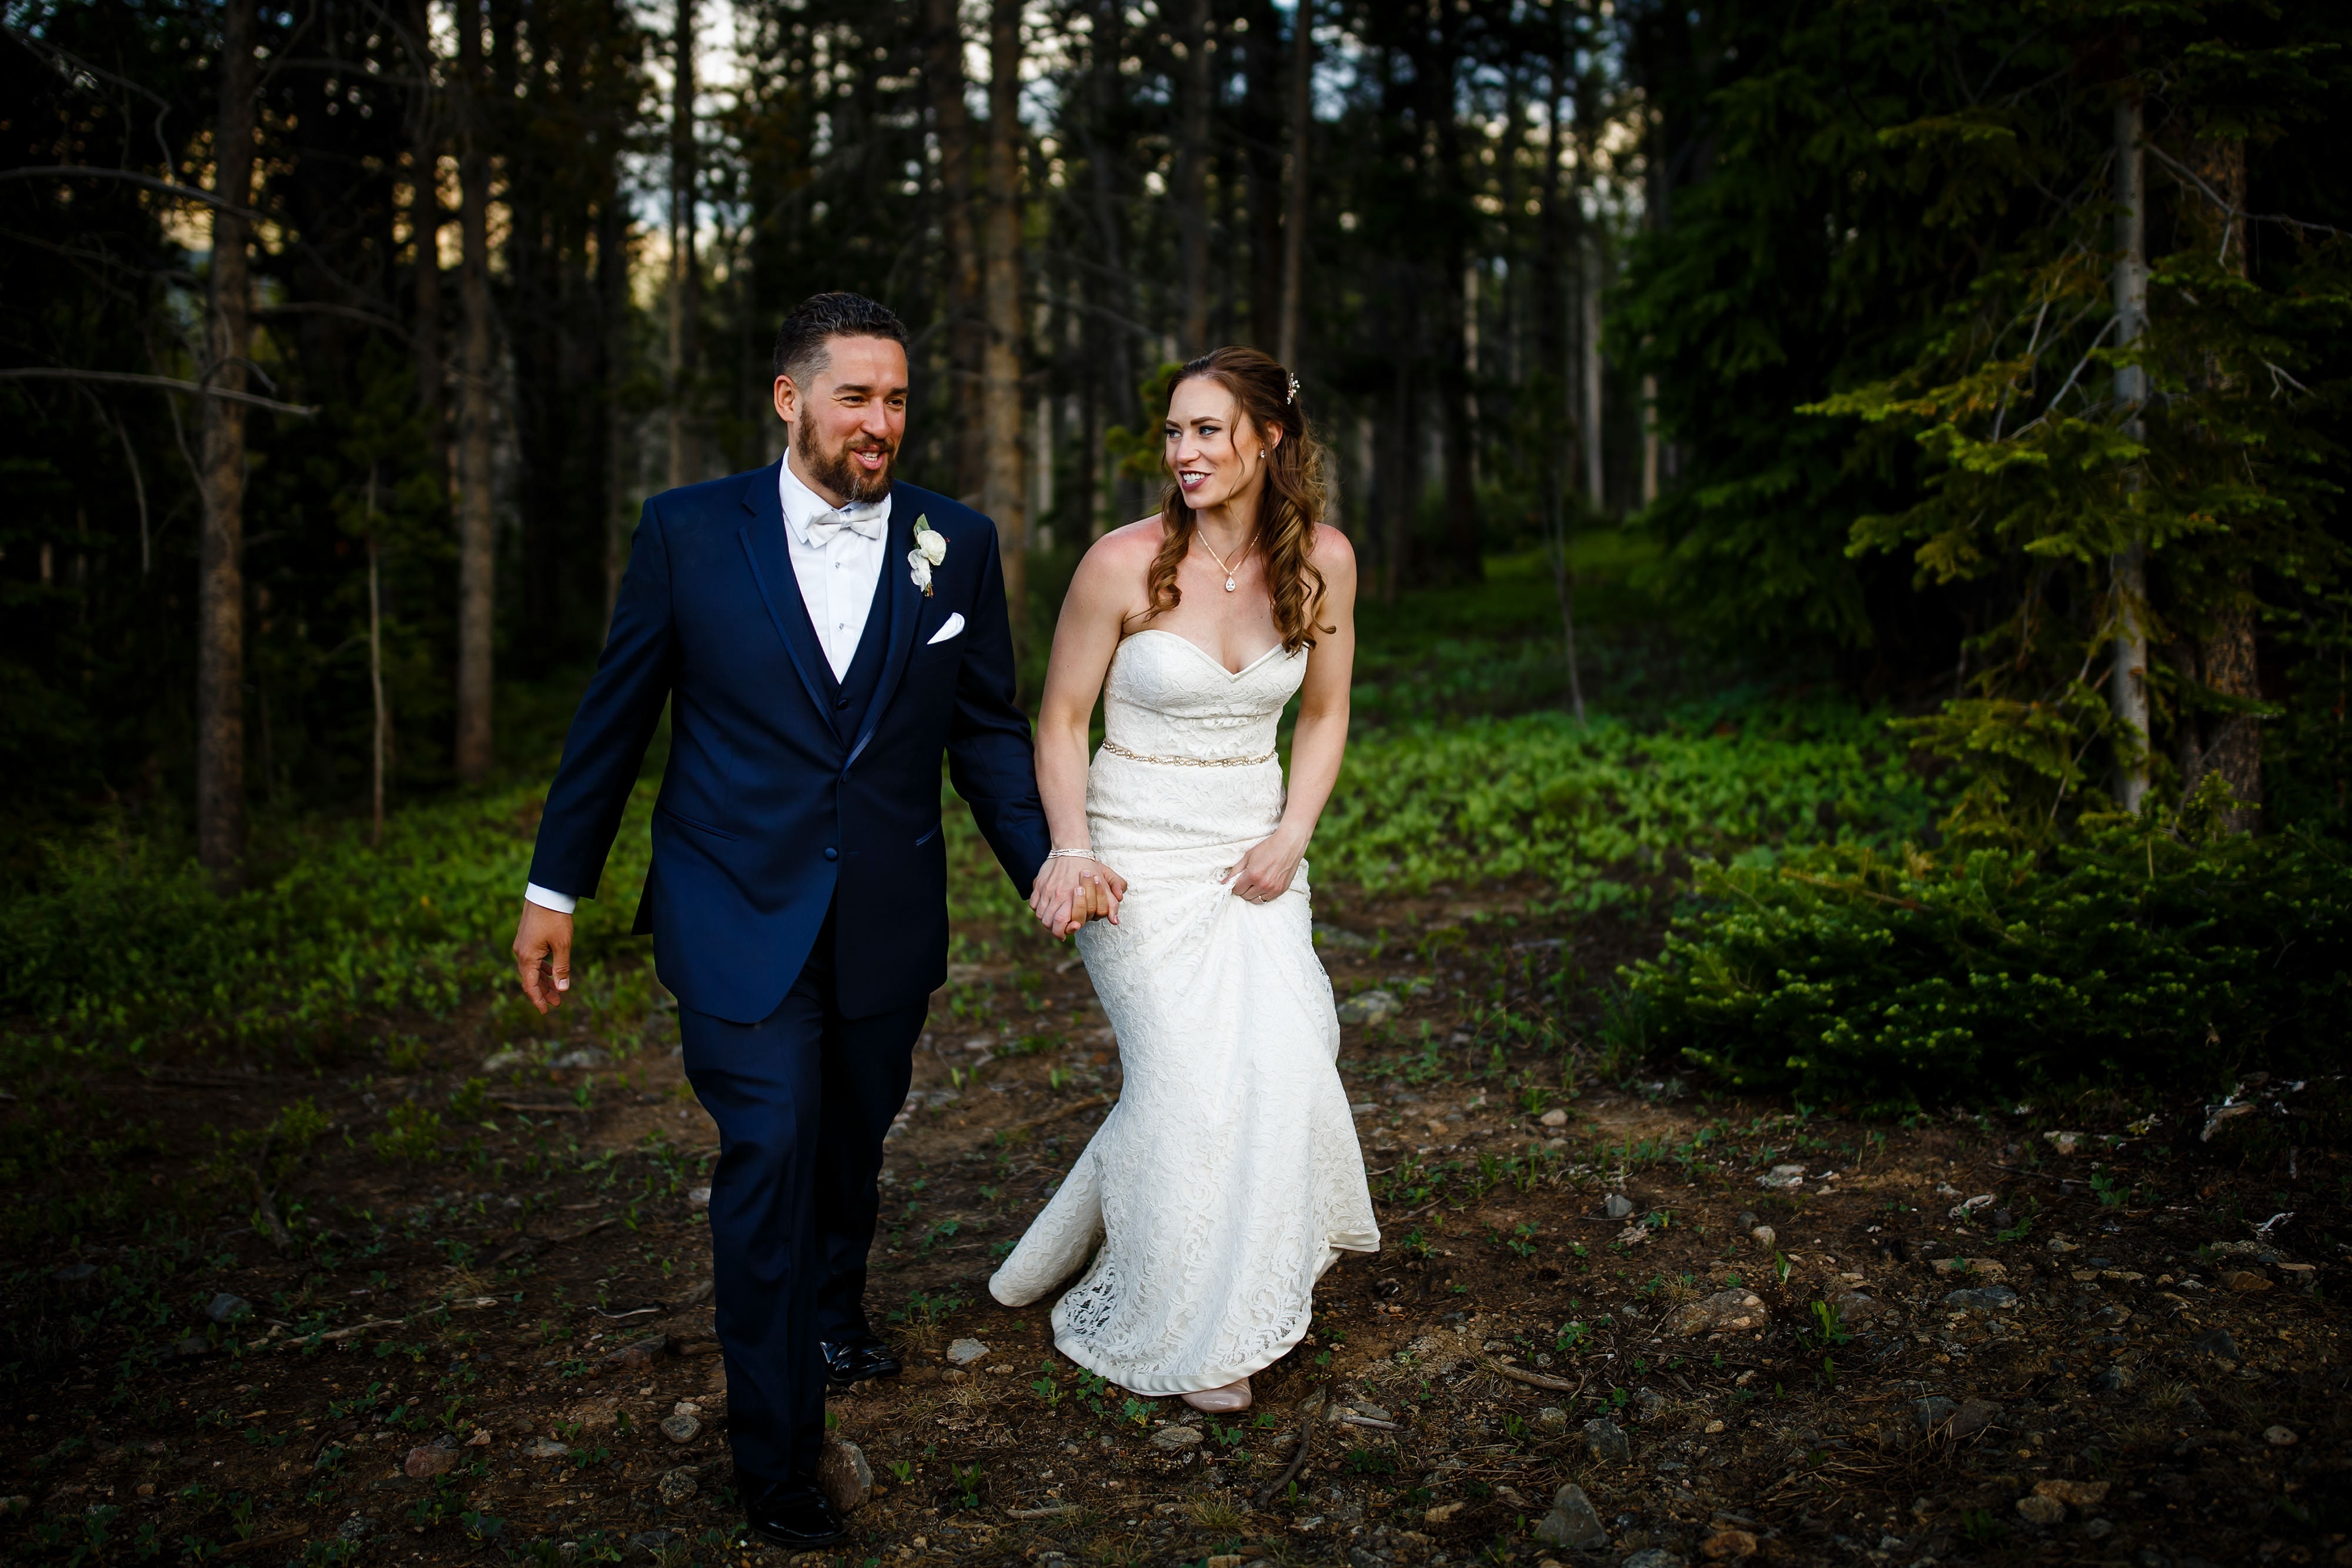 Nick and Sharon walk out of the woods together during their TenMile Station wedding in Breckenridge